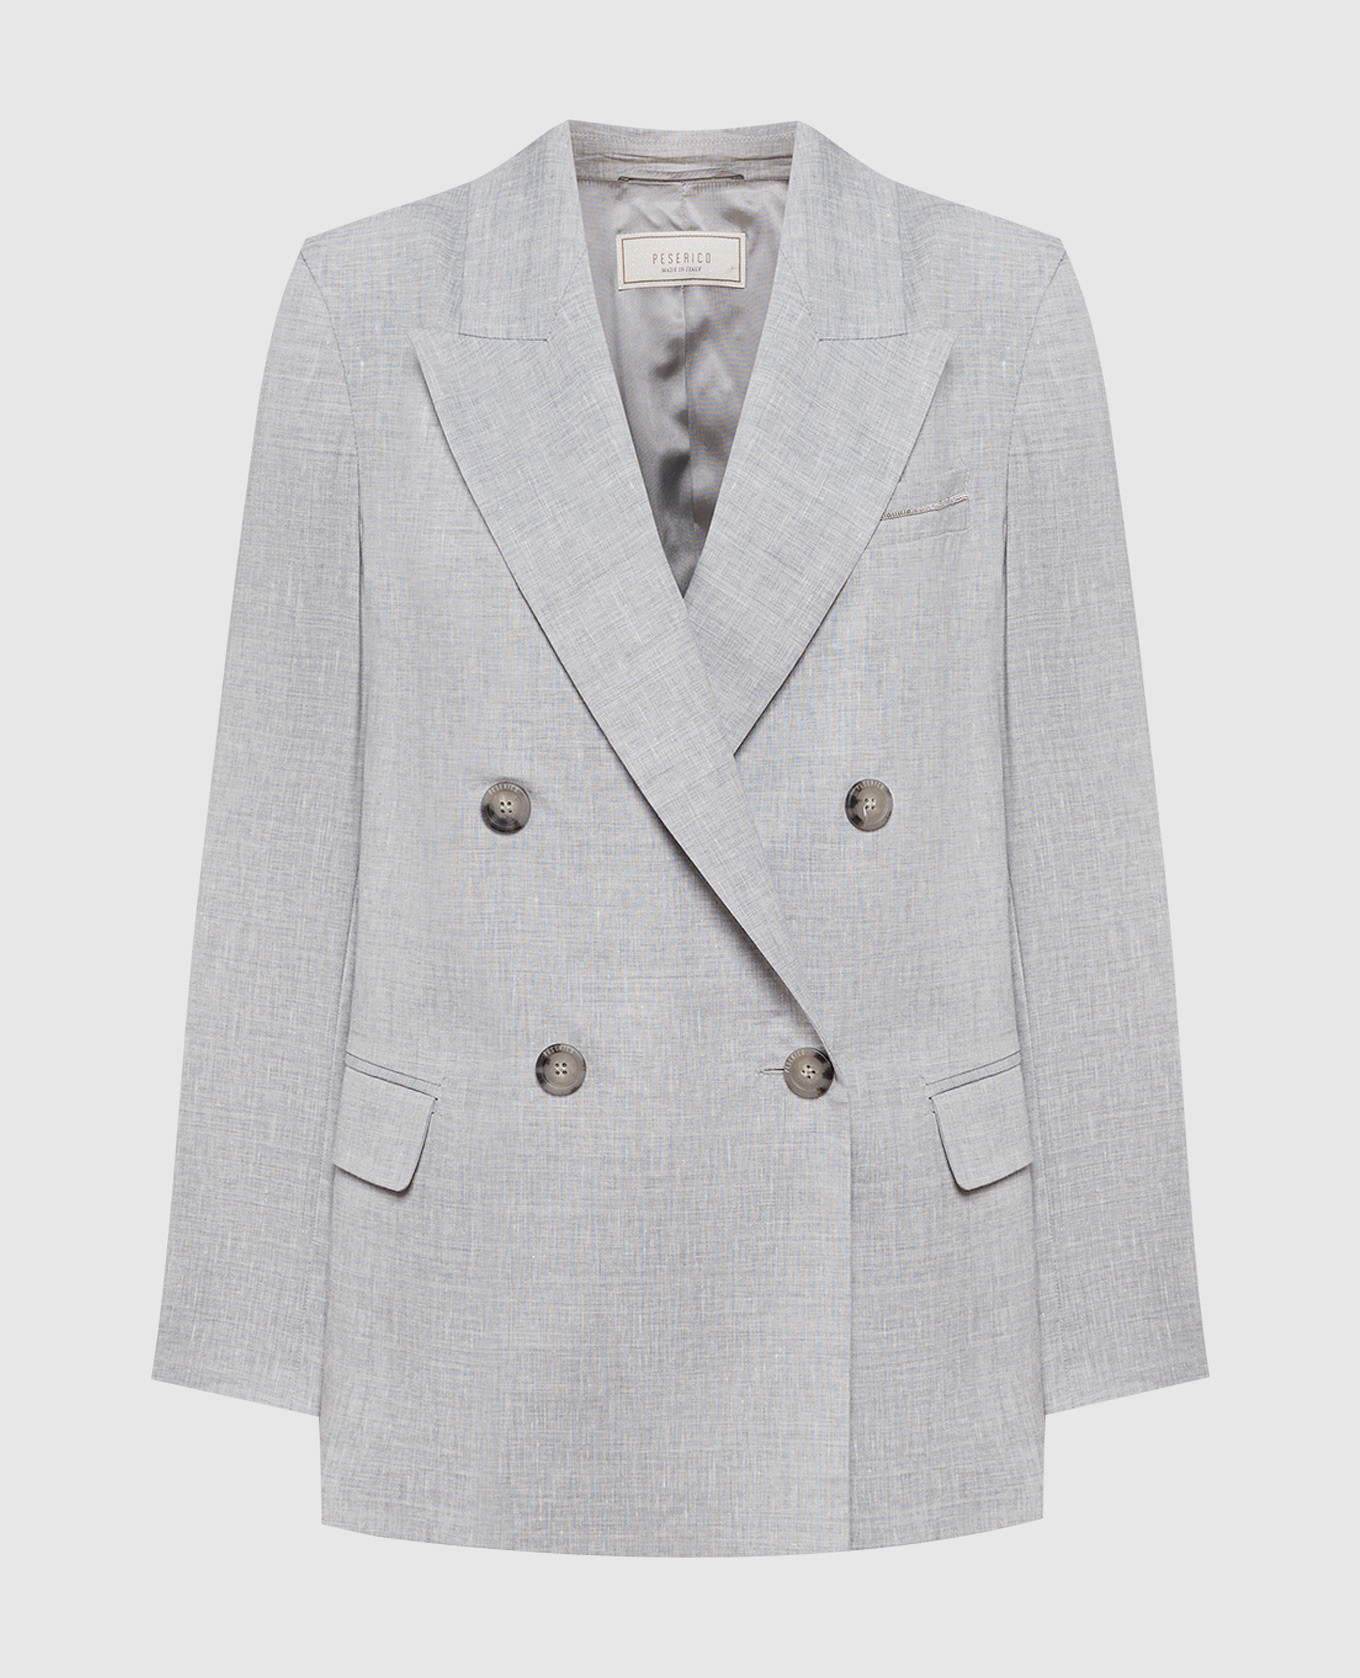 Gray double-breasted wool and linen jacket